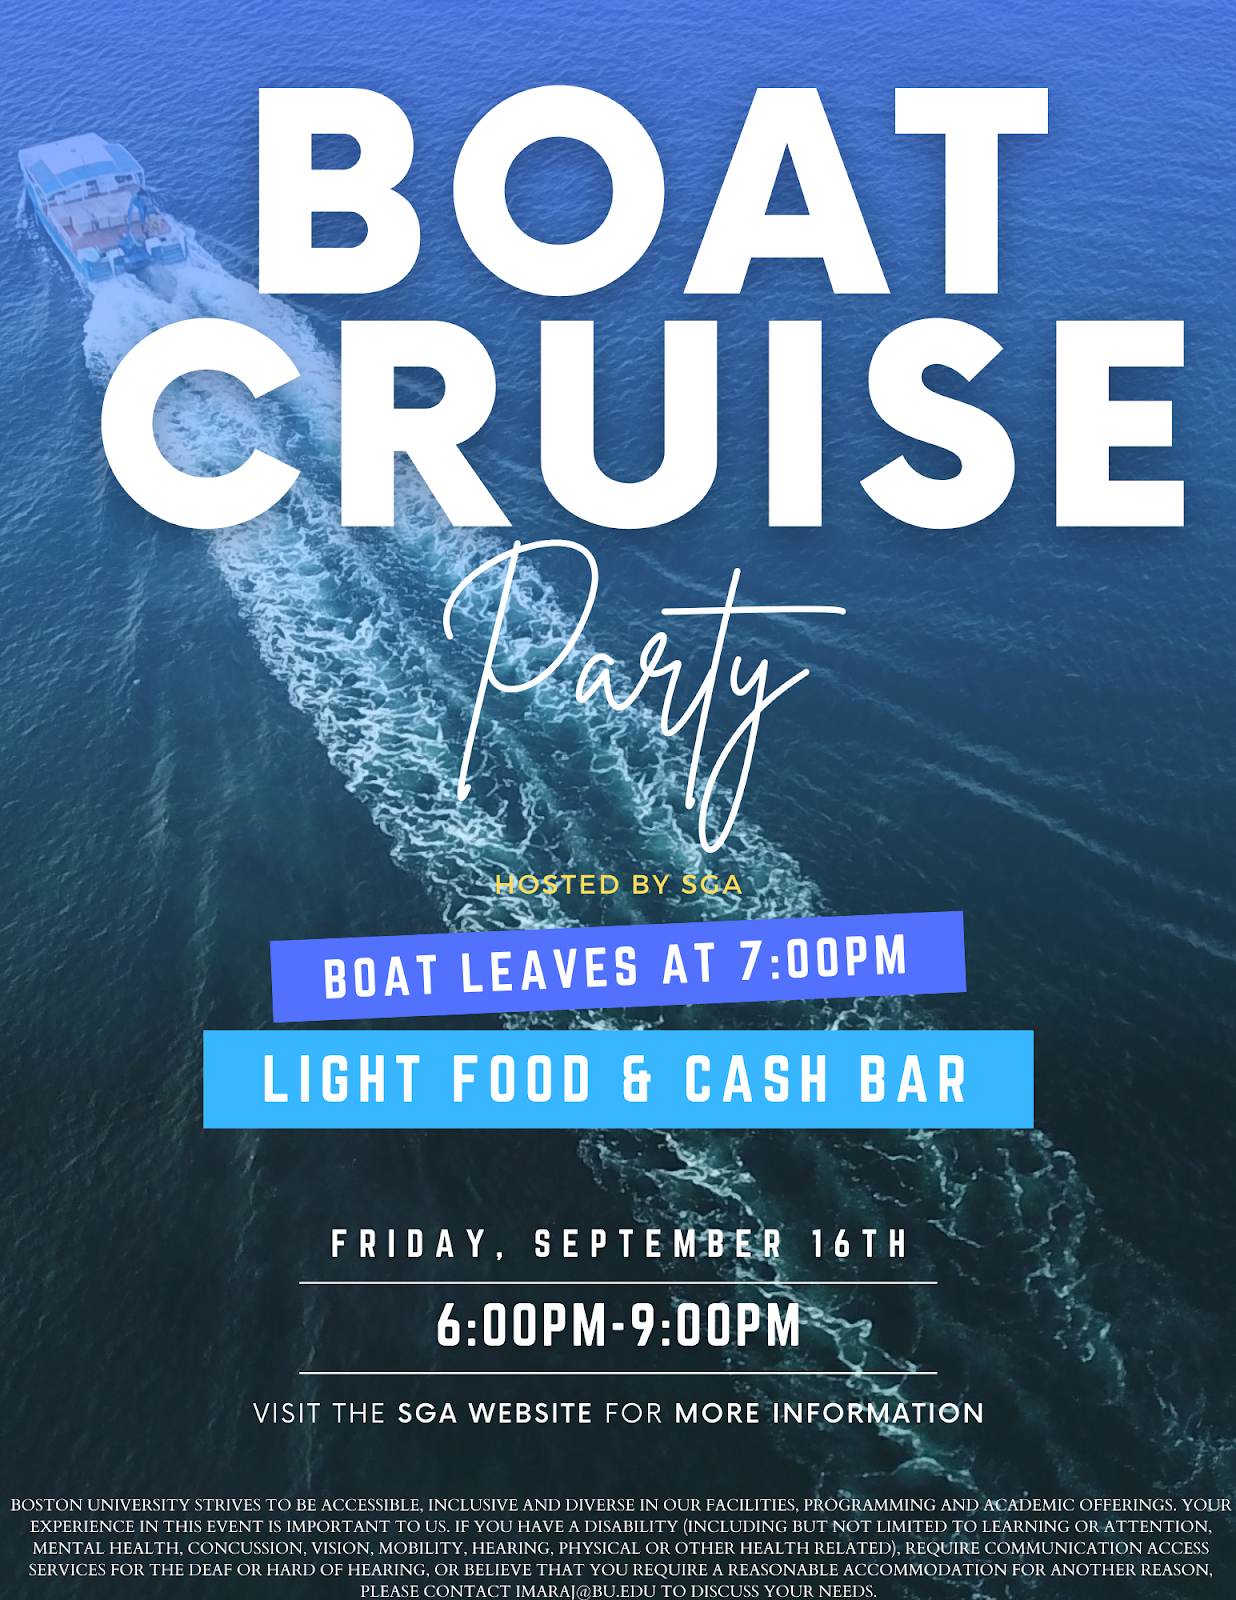 Image of a speedboat cruising on dark blue ocean water with words overlaying that say BU Law Boat Cruise. Boat leaves at 7. Light food and cash bar. At the bottom is an accommodation statement advising anybody with an accommodation need to contact Imara Joroff at imaraj@bu.edu.